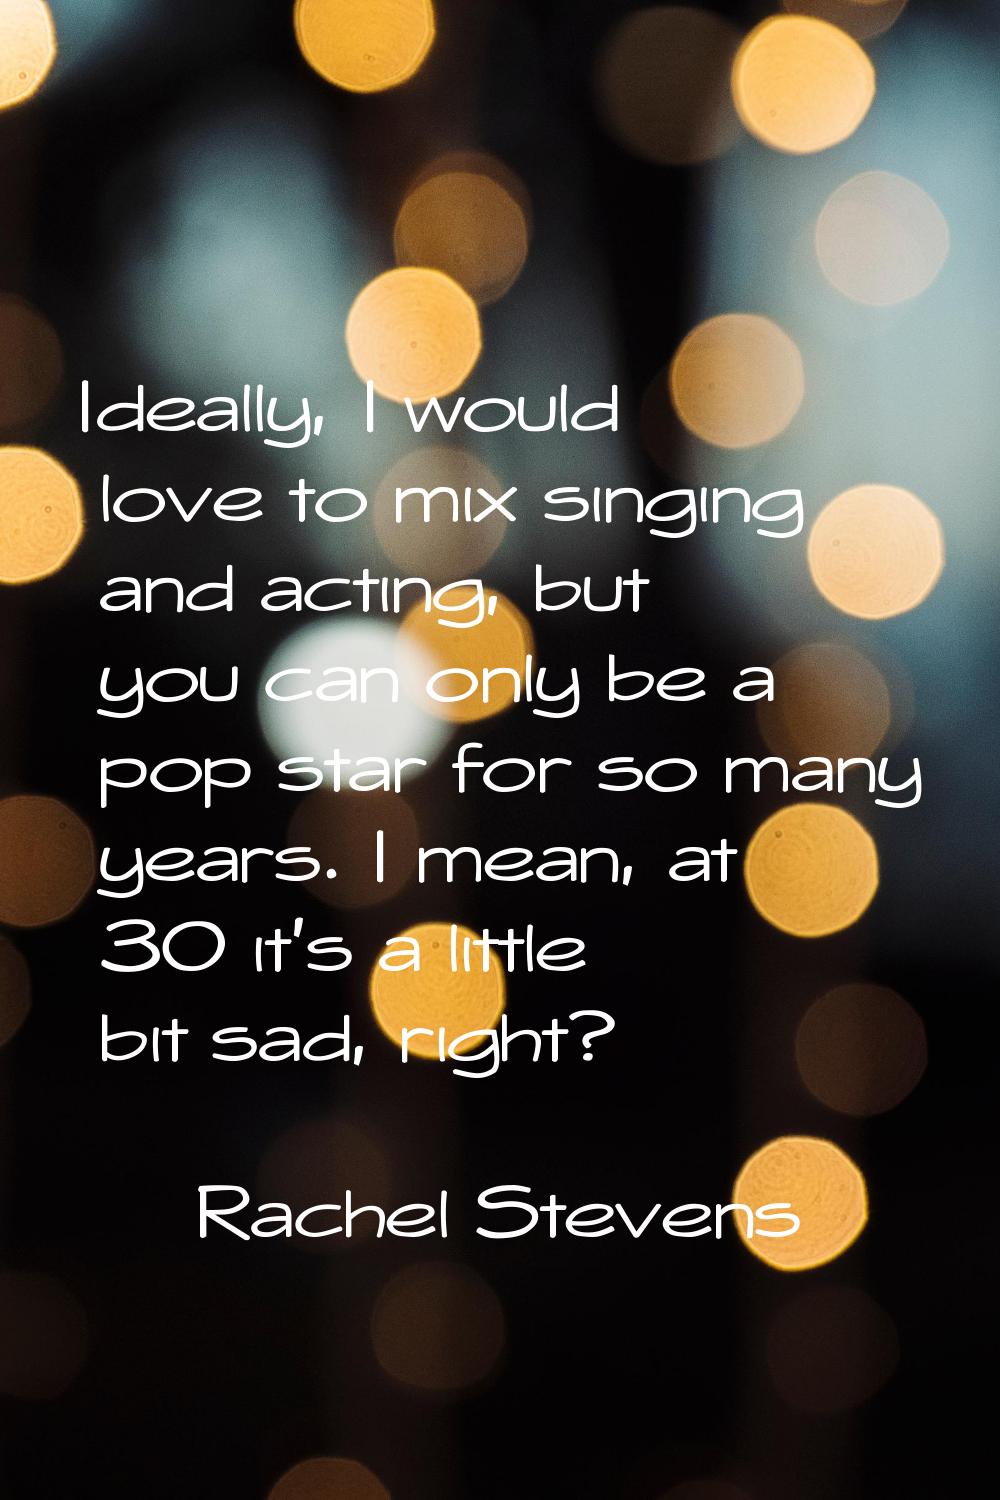 Ideally, I would love to mix singing and acting, but you can only be a pop star for so many years. 